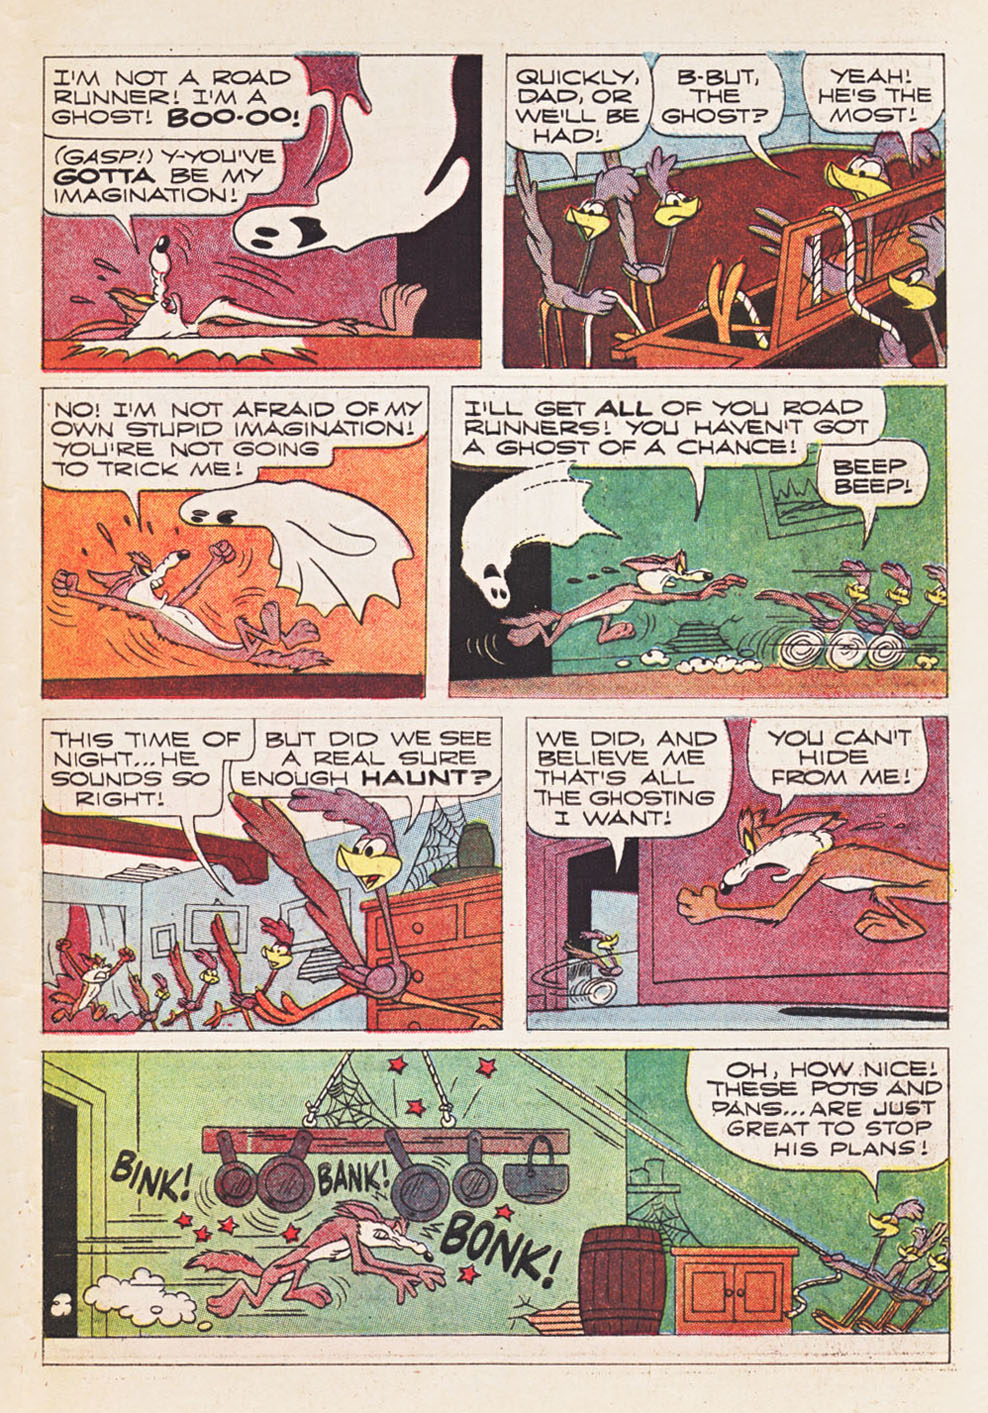 Read online Beep Beep The Road Runner comic -  Issue #22 - 27